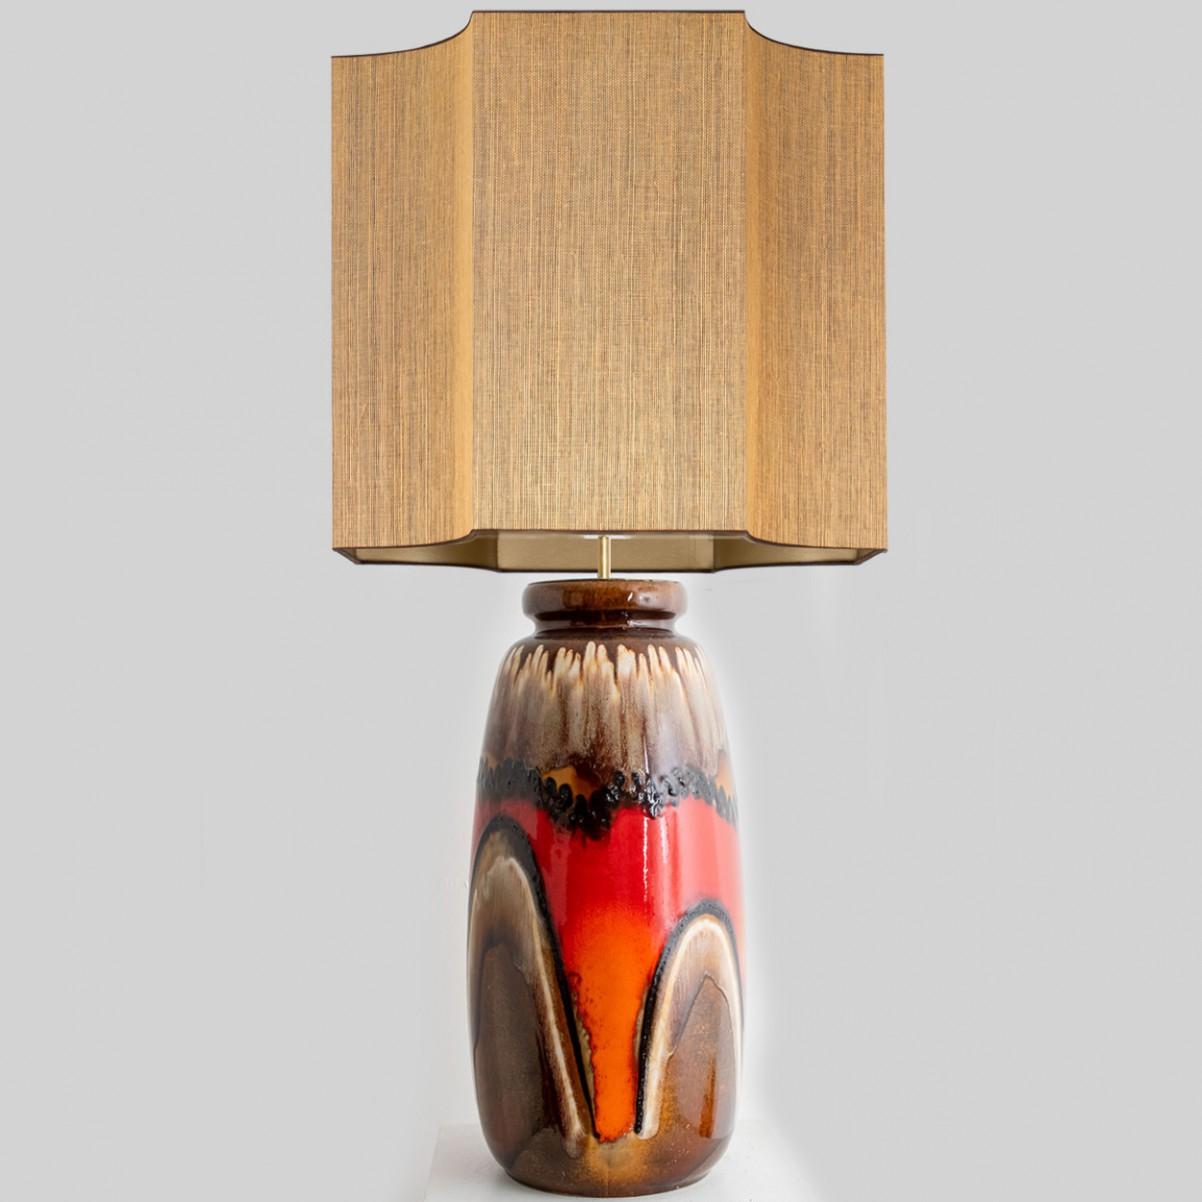 Ceramic table lamp with brown with red and orange glaze. Manufactured in West-Germany in the 1970's.
The style of the glaze is in between 'Fat Lava' and 'Drip glaze'. Which means the glaze is thick on some parts, and one glaze runs down over another